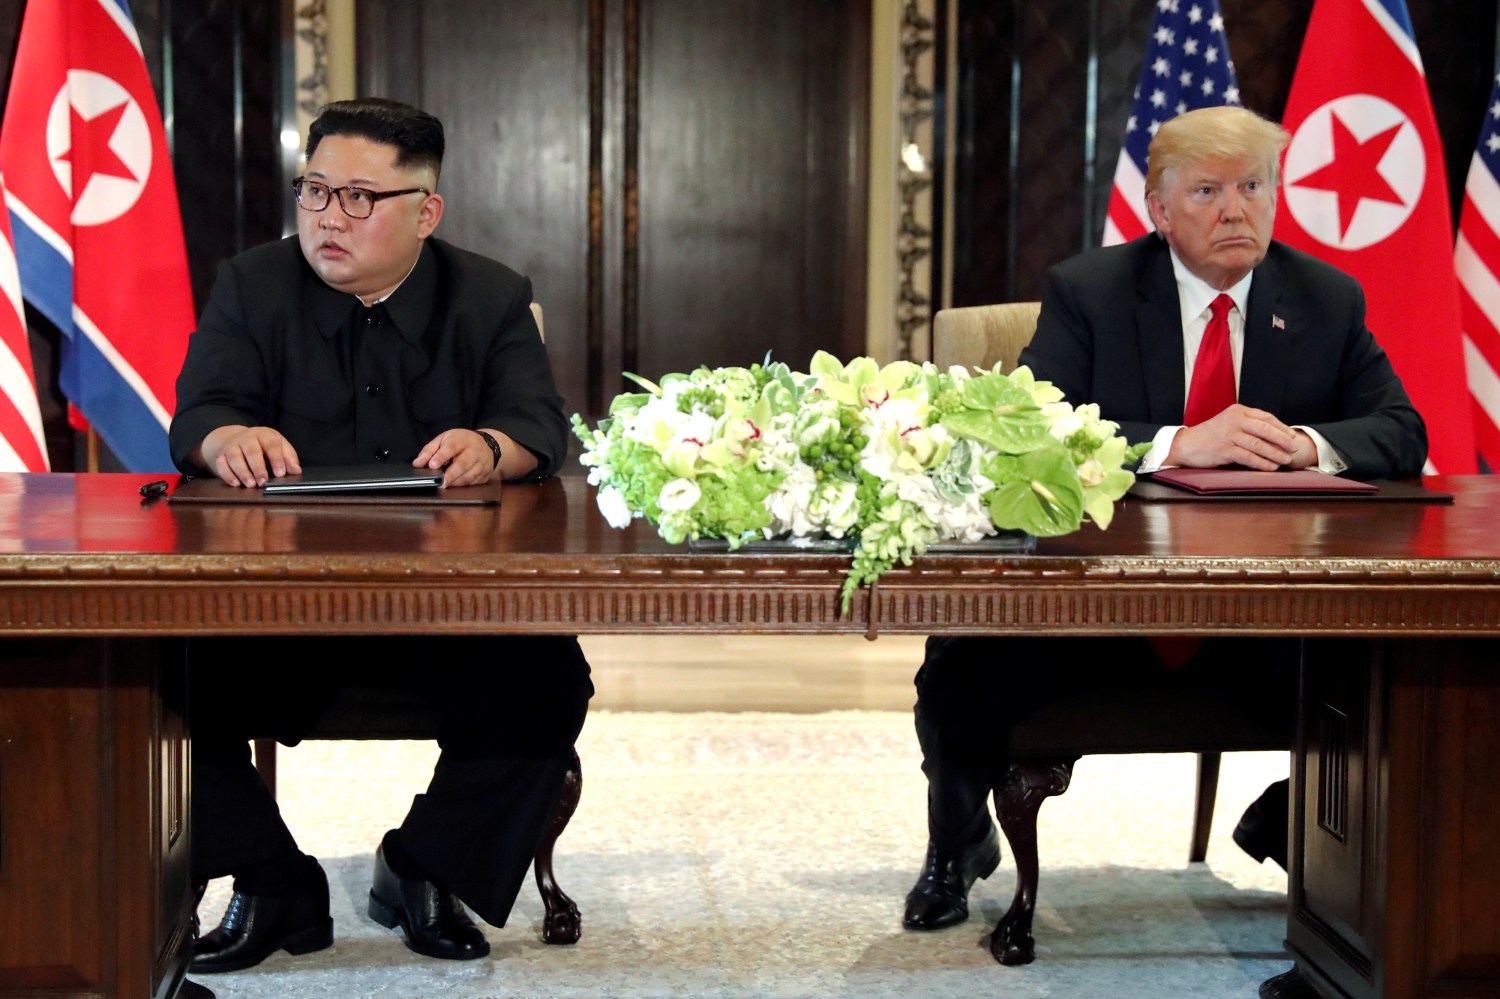 U.S. President Donald Trump and North Korea's leader Kim Jong Un hold a signing ceremony at the conclusion of their summit at the Capella Hotel on the resort island of Sentosa, Singapore June 12, 2018. Picture taken June 12, 2018. REUTERS/Jonathan Ernst - RC1D8AA662B0